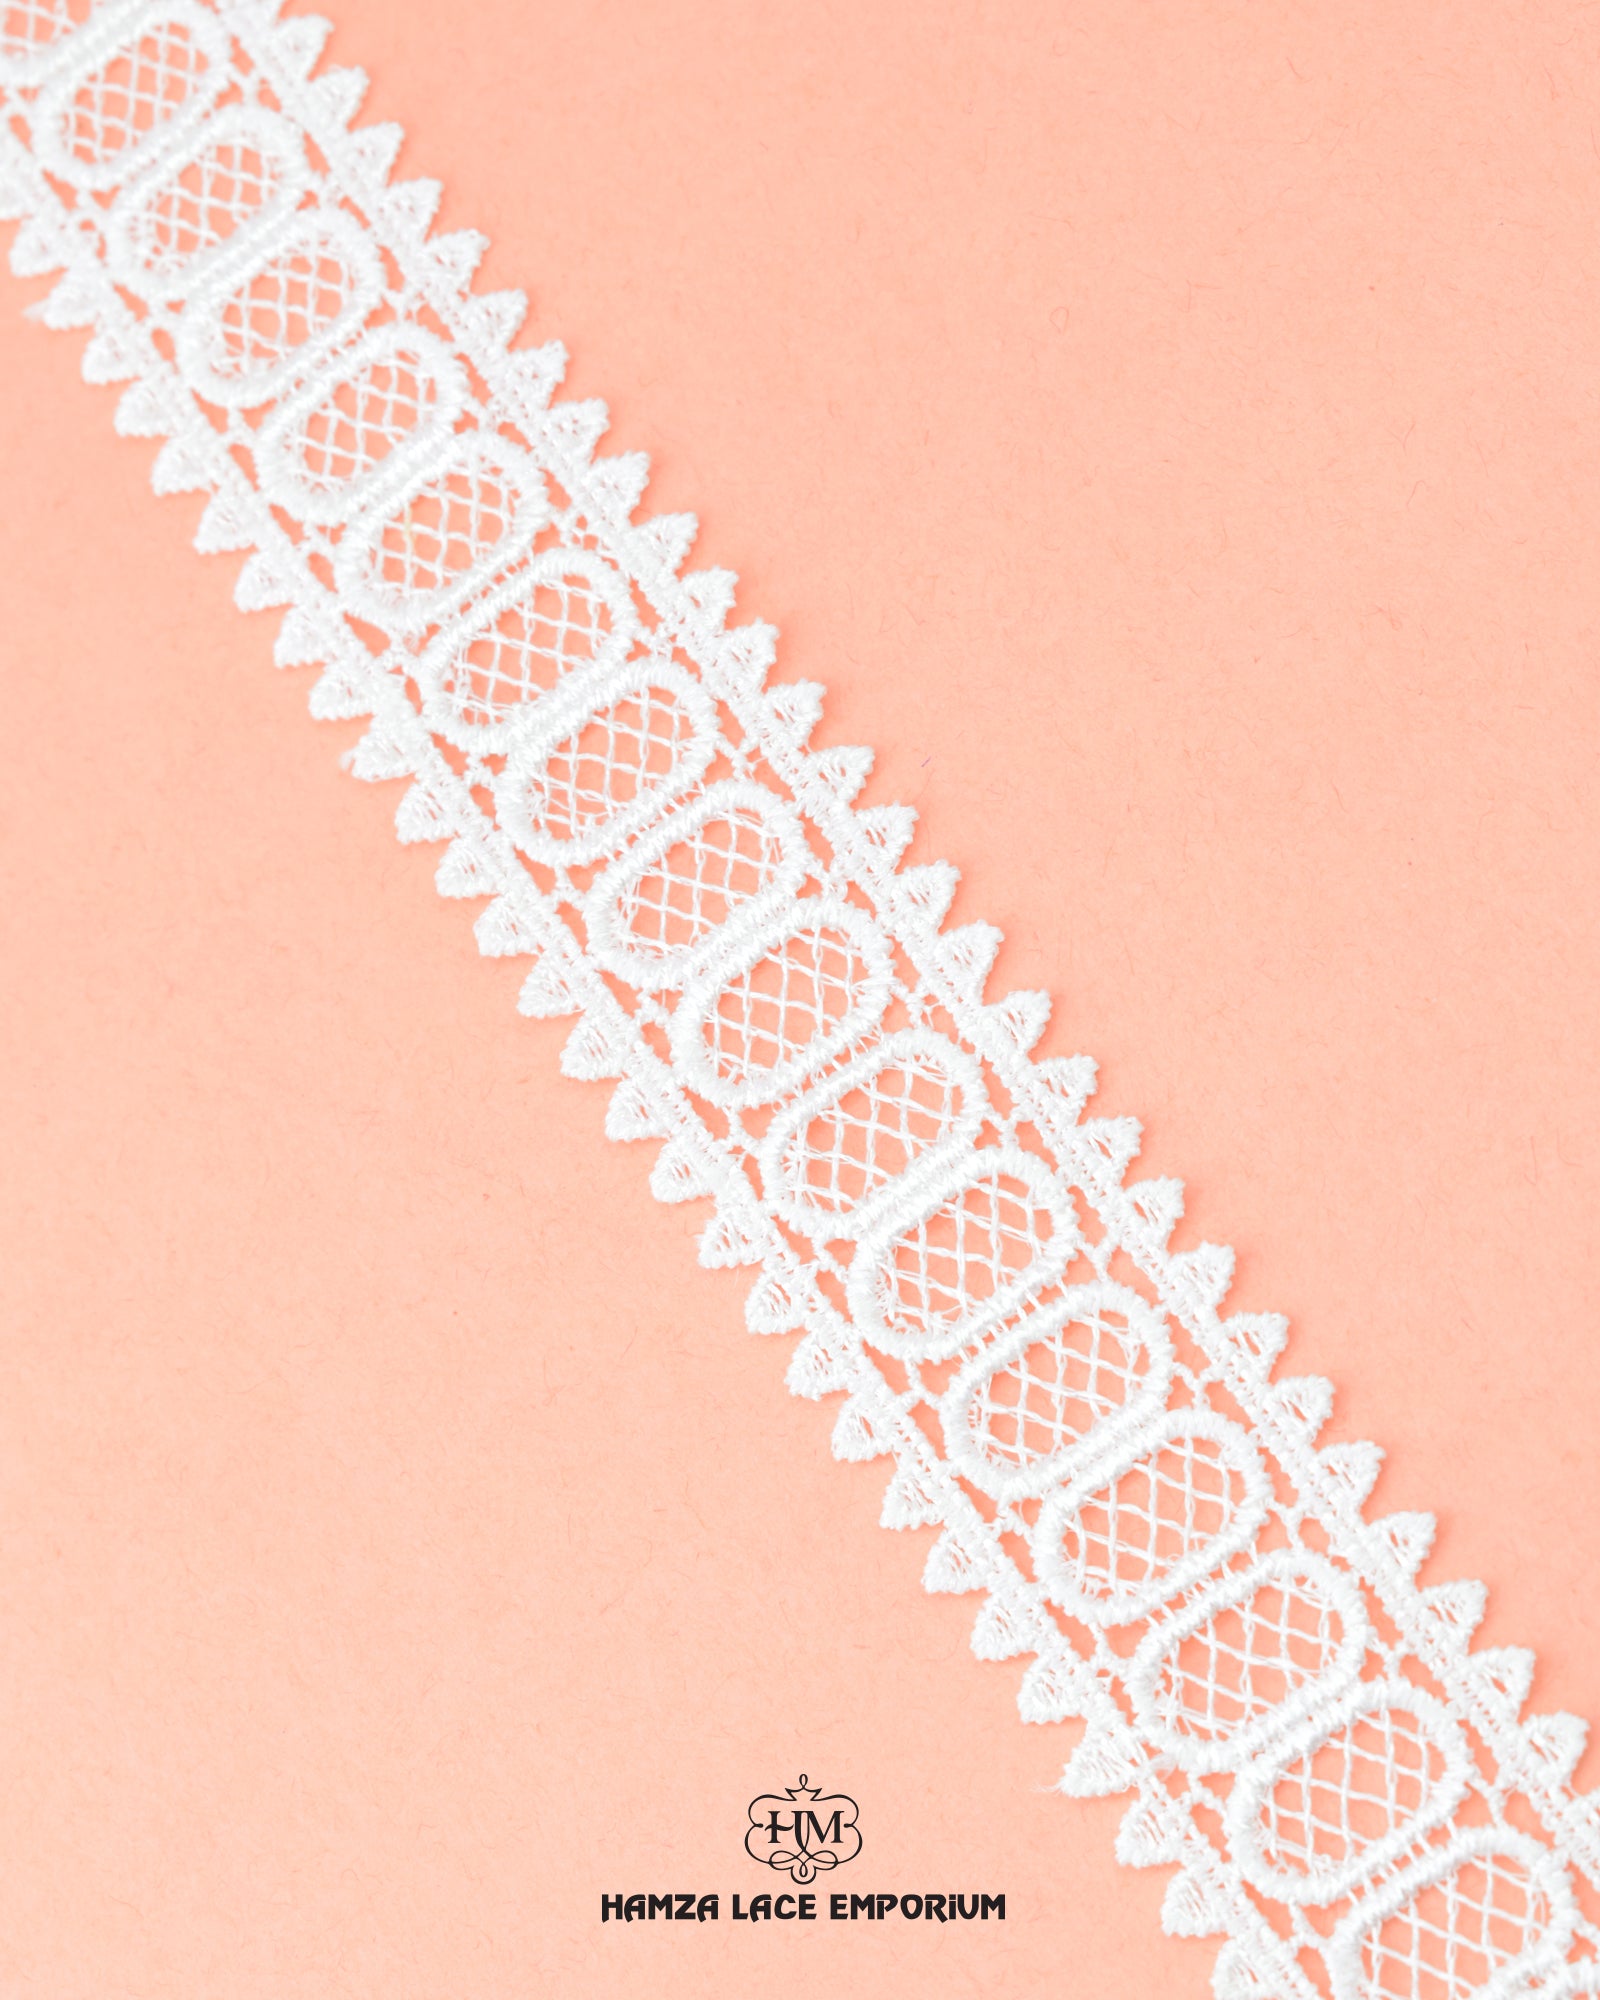 'Two Side Border Lace 22845' with the brand name 'Hamza Lace' at the bottom